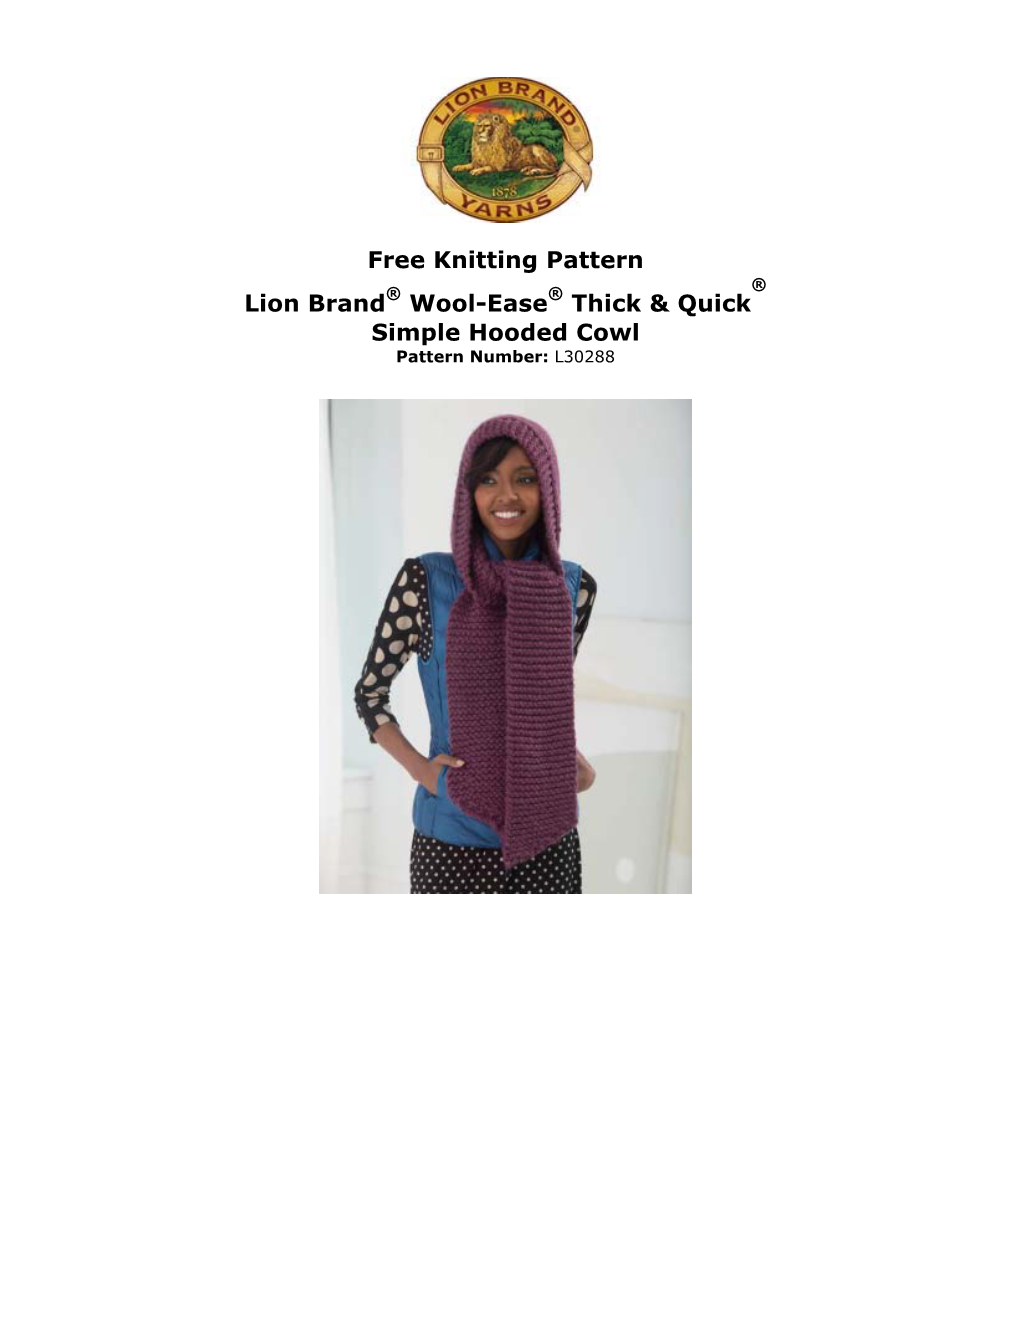 Free Knitting Pattern: Wool-Ease® Thick & Quick® Simple Hooded Cowl